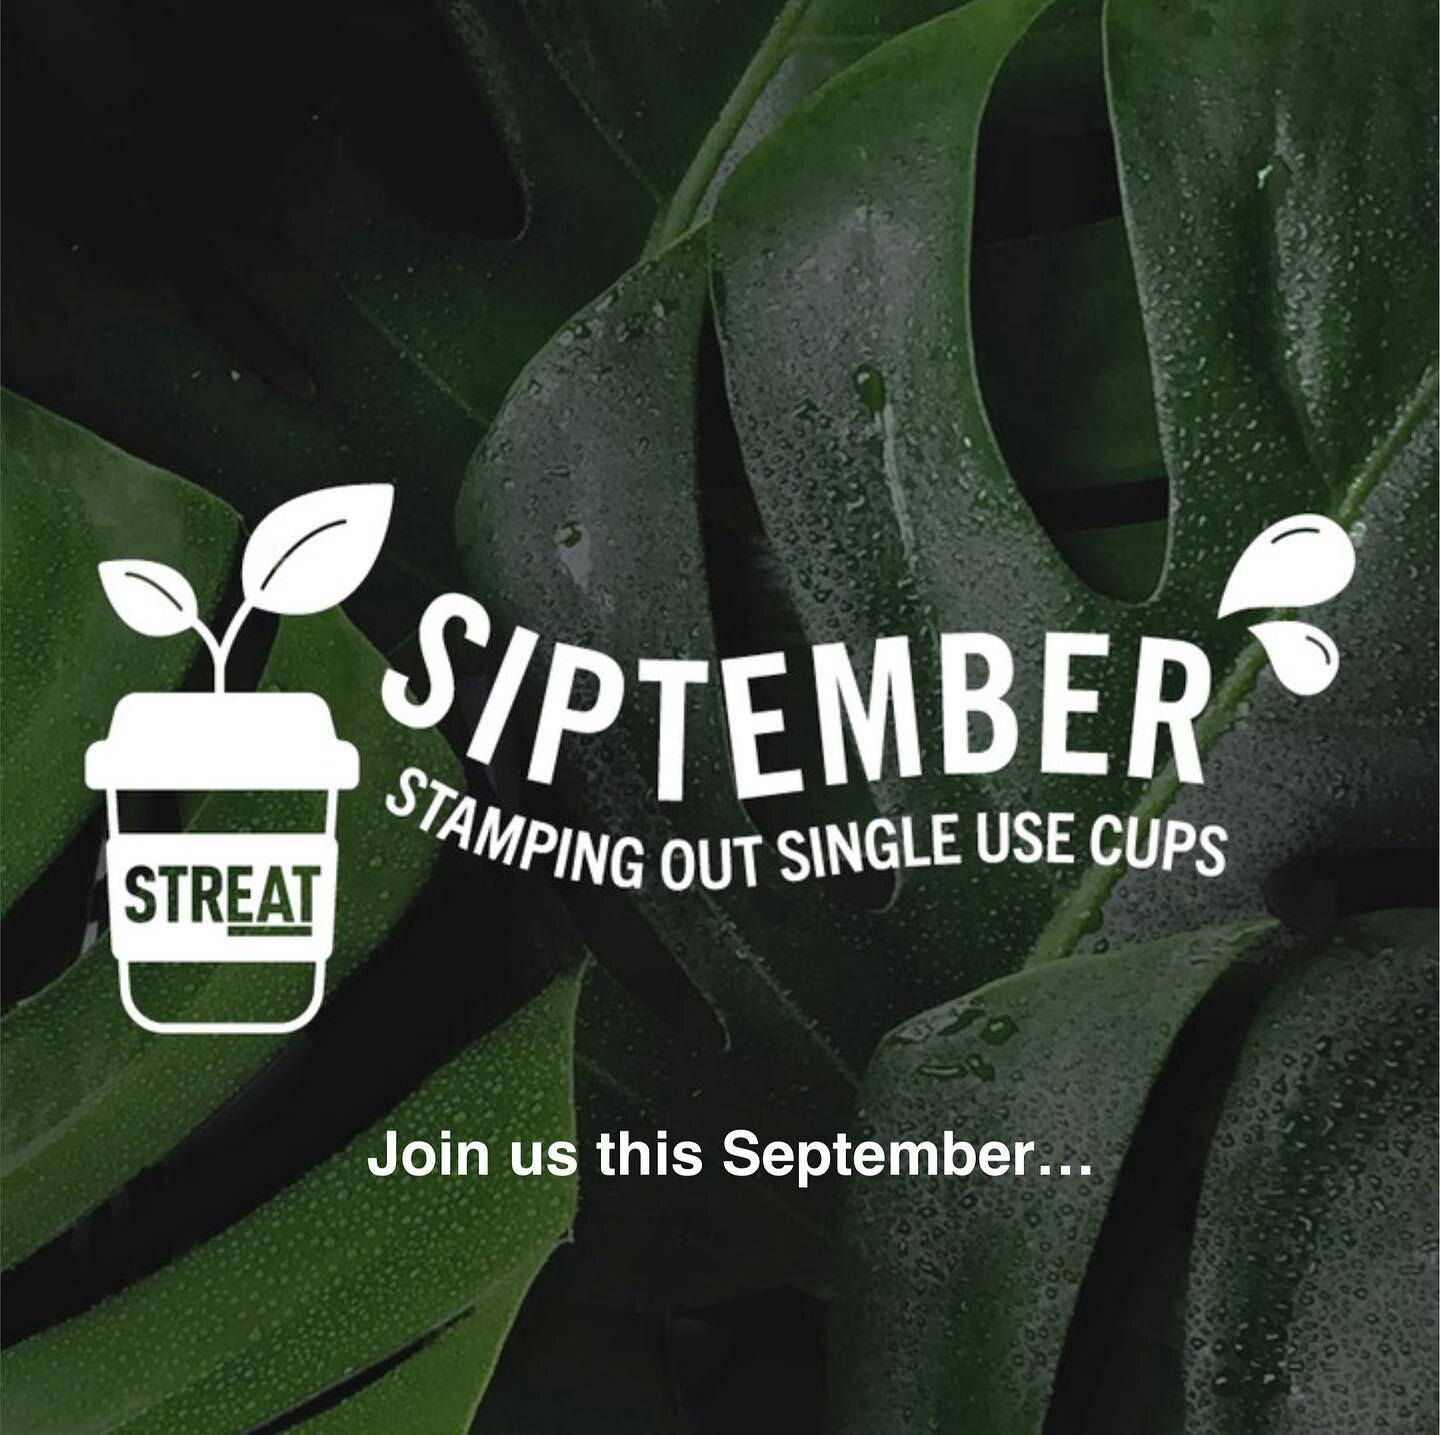 Help us stamp out single use coffee cups this September.

Moving Feast partner, @streatmelbourne, is excited to announce that they are rebooting their Siptember campaign in September 2023, aimed to reduce single use coffee cups, and we'd love to invi